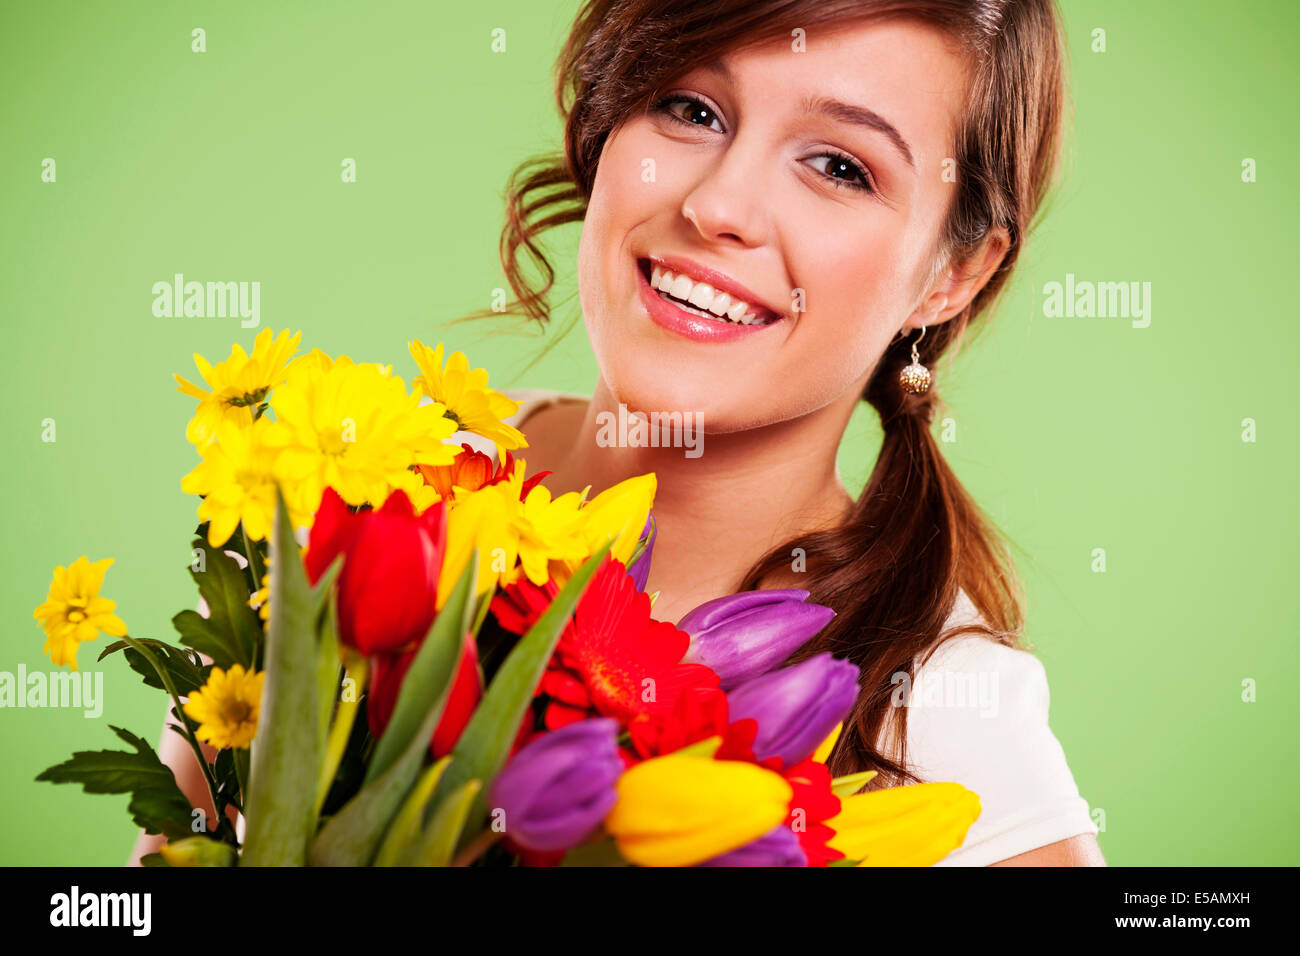 Happy young woman with flowers, Debica, Poland Stock Photo